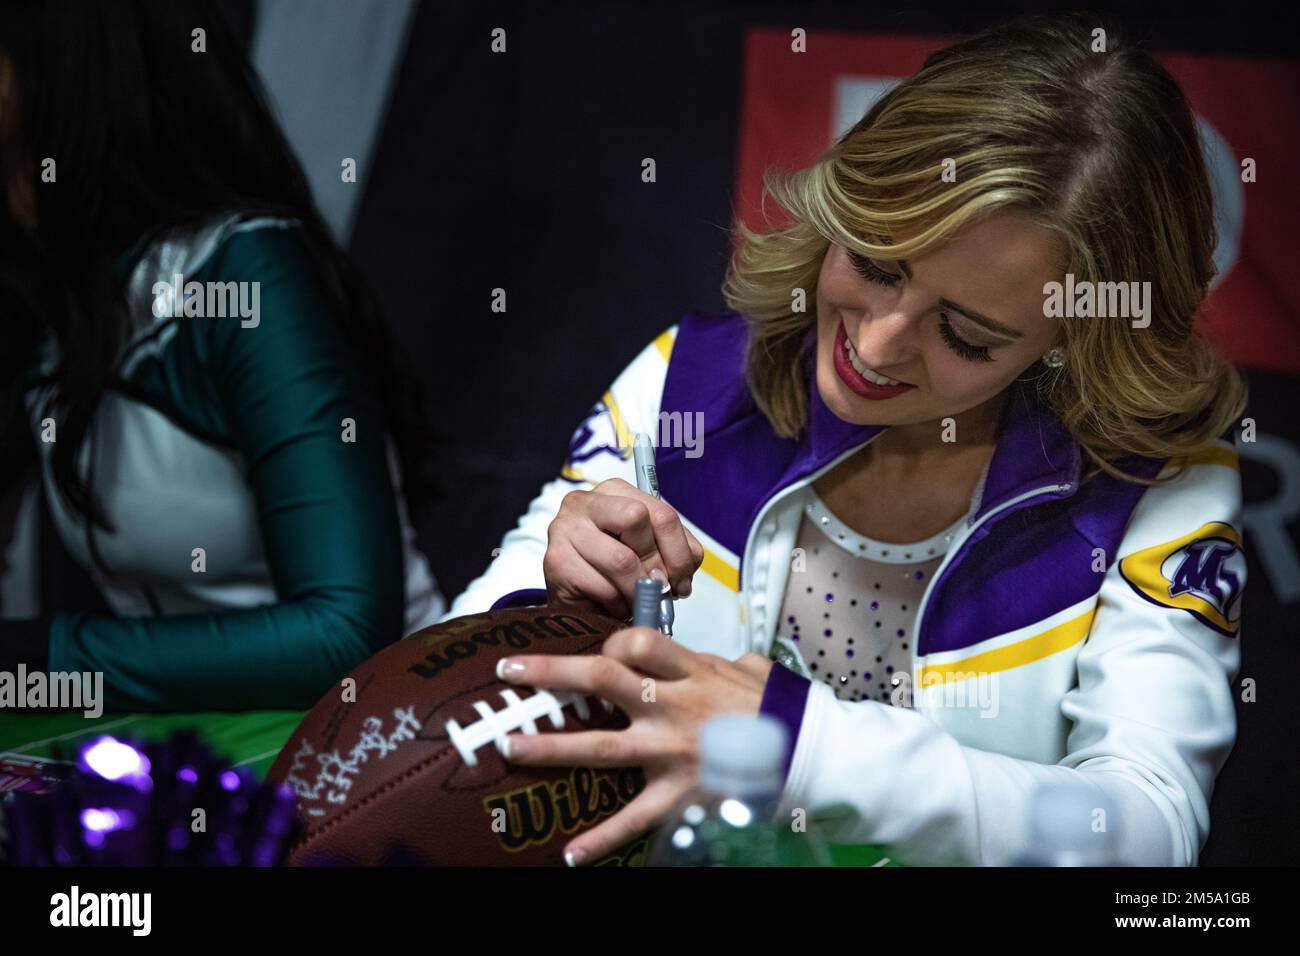 Casey McNally, a cheerleader with the Minnesota Vikings, signs a football picture during a meet and greet event held at Poznan, Poland, Feb. 13, 2022. As part of the event, the Soldiers had the opportunity to take pictures, get autographs, and watch the Super Bowl with the NFL player and cheerleaders. Stock Photo